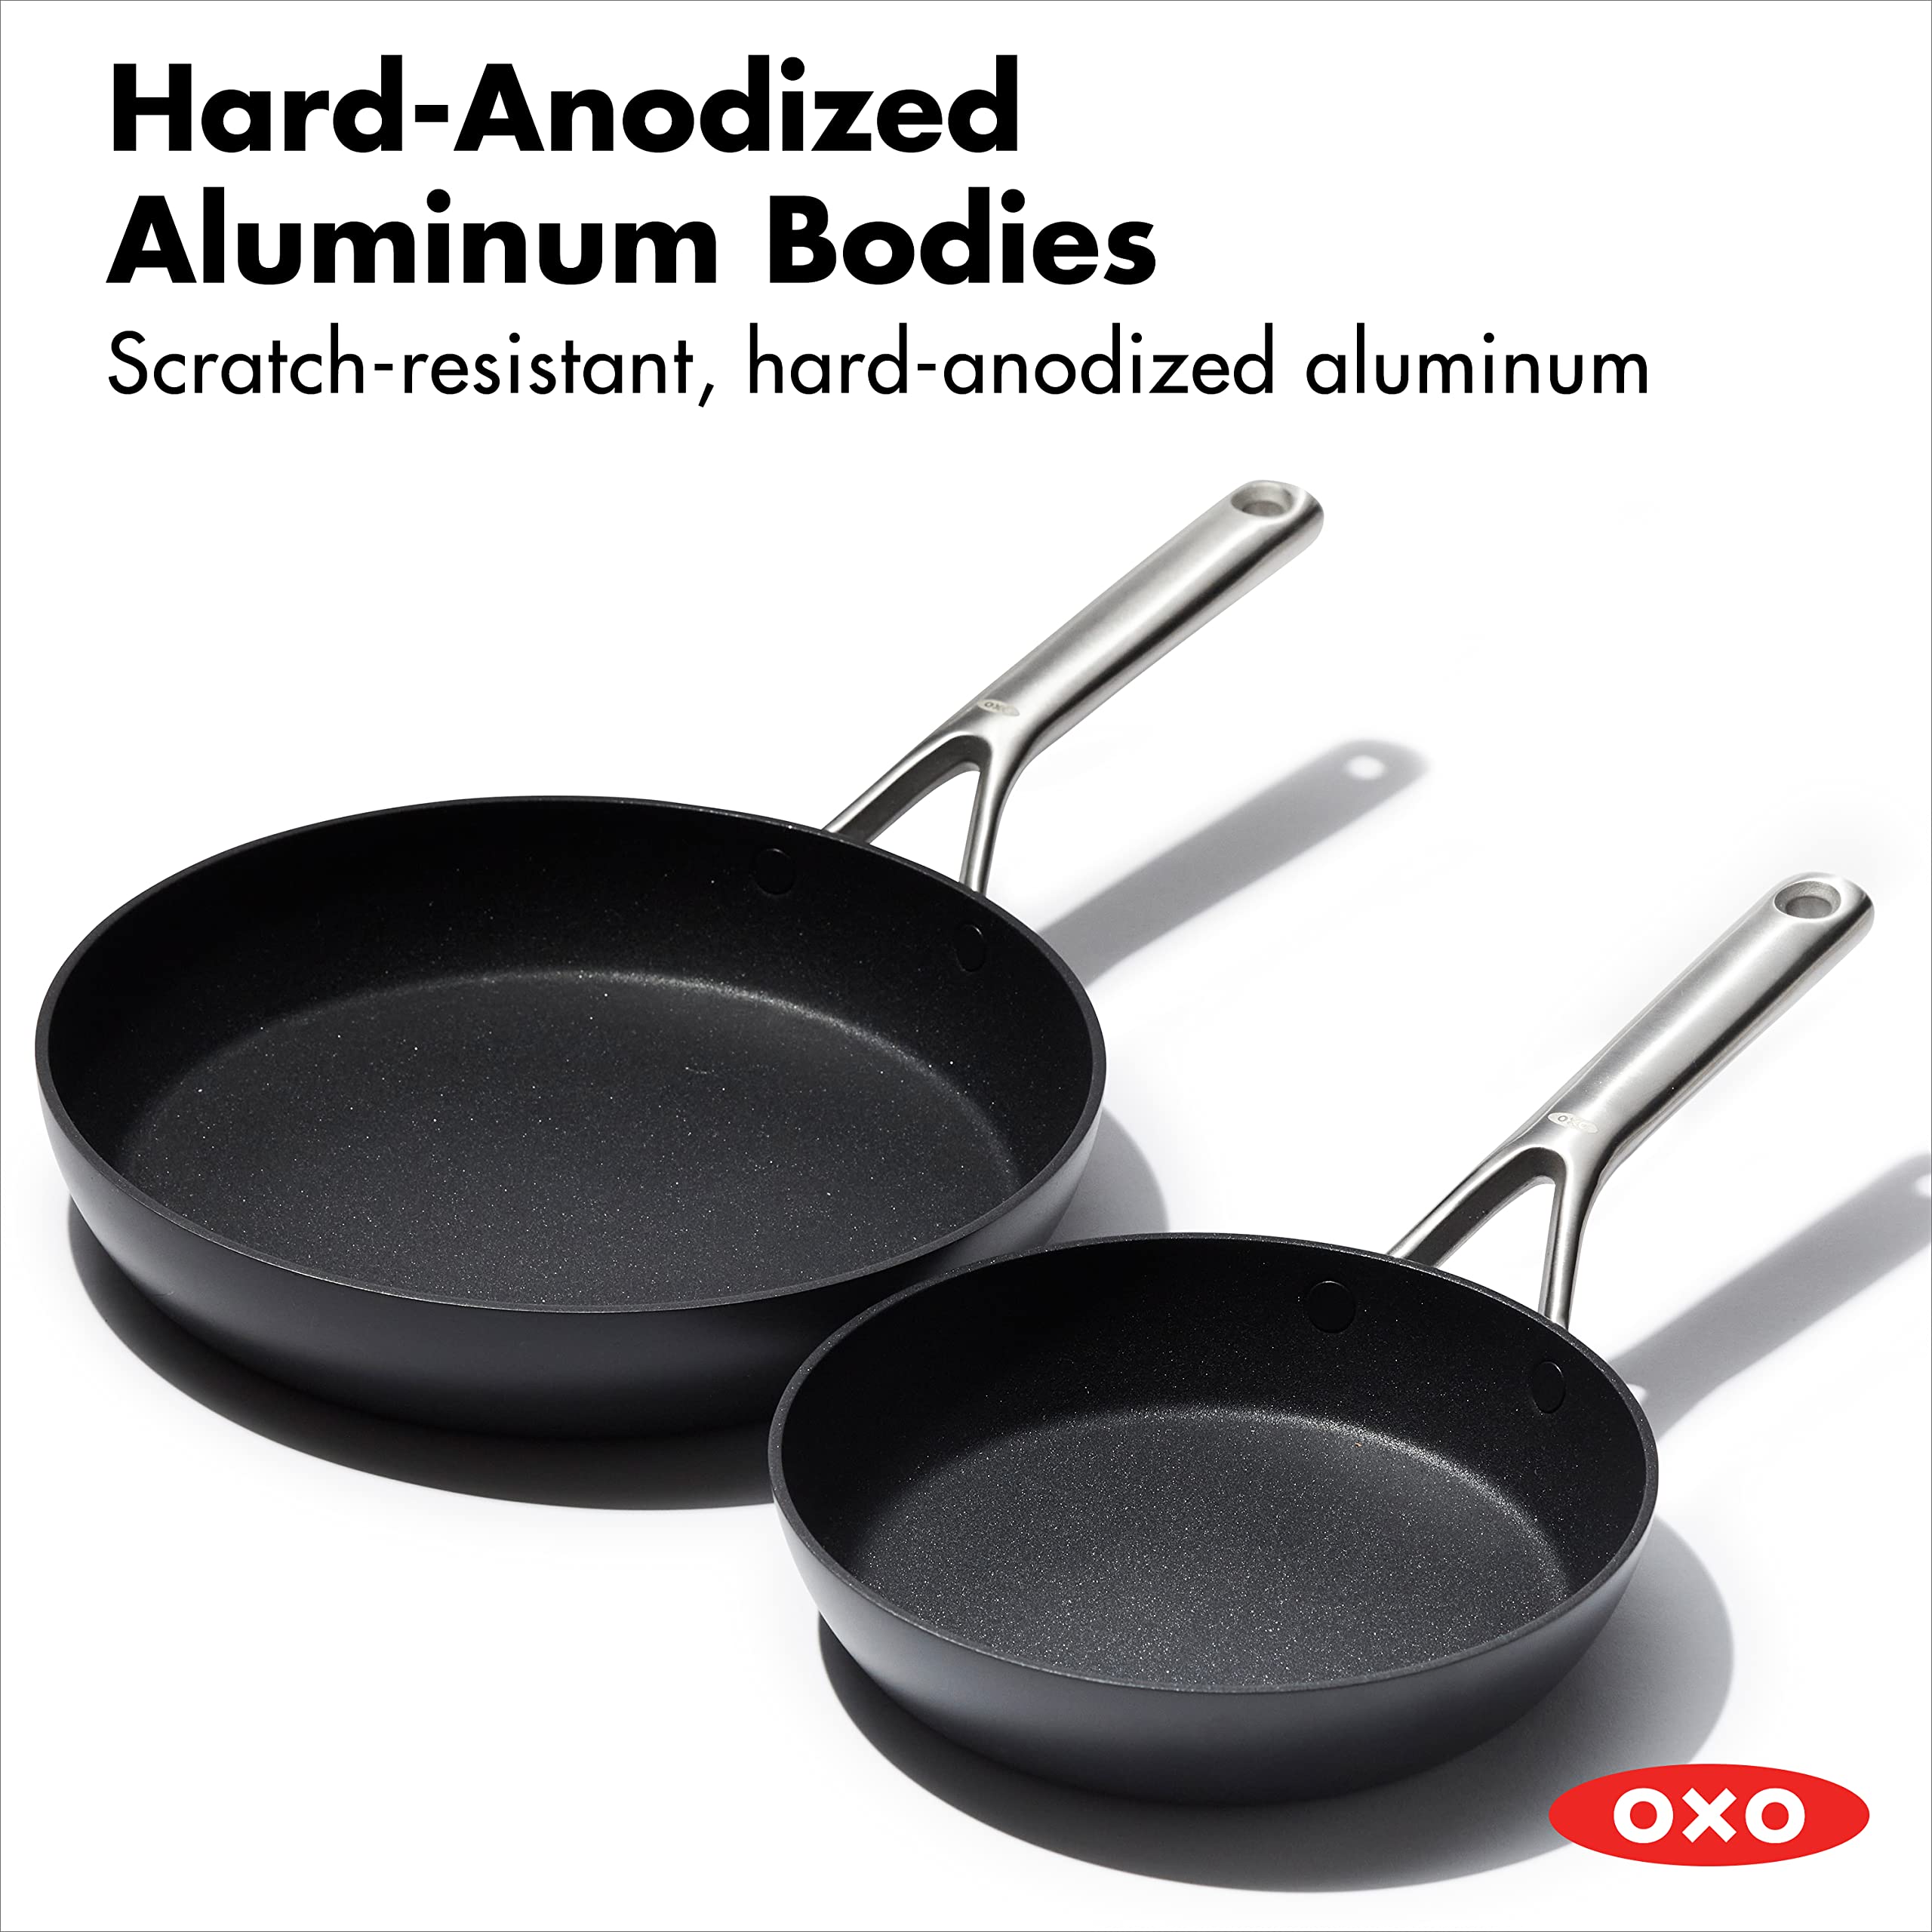 OXO Professional Hard Anodized PFAS-Free Nonstick Frying Pan and Skillet Set, Induction, Diamond reinforced Coating, Dishwasher Safe, Oven Safe